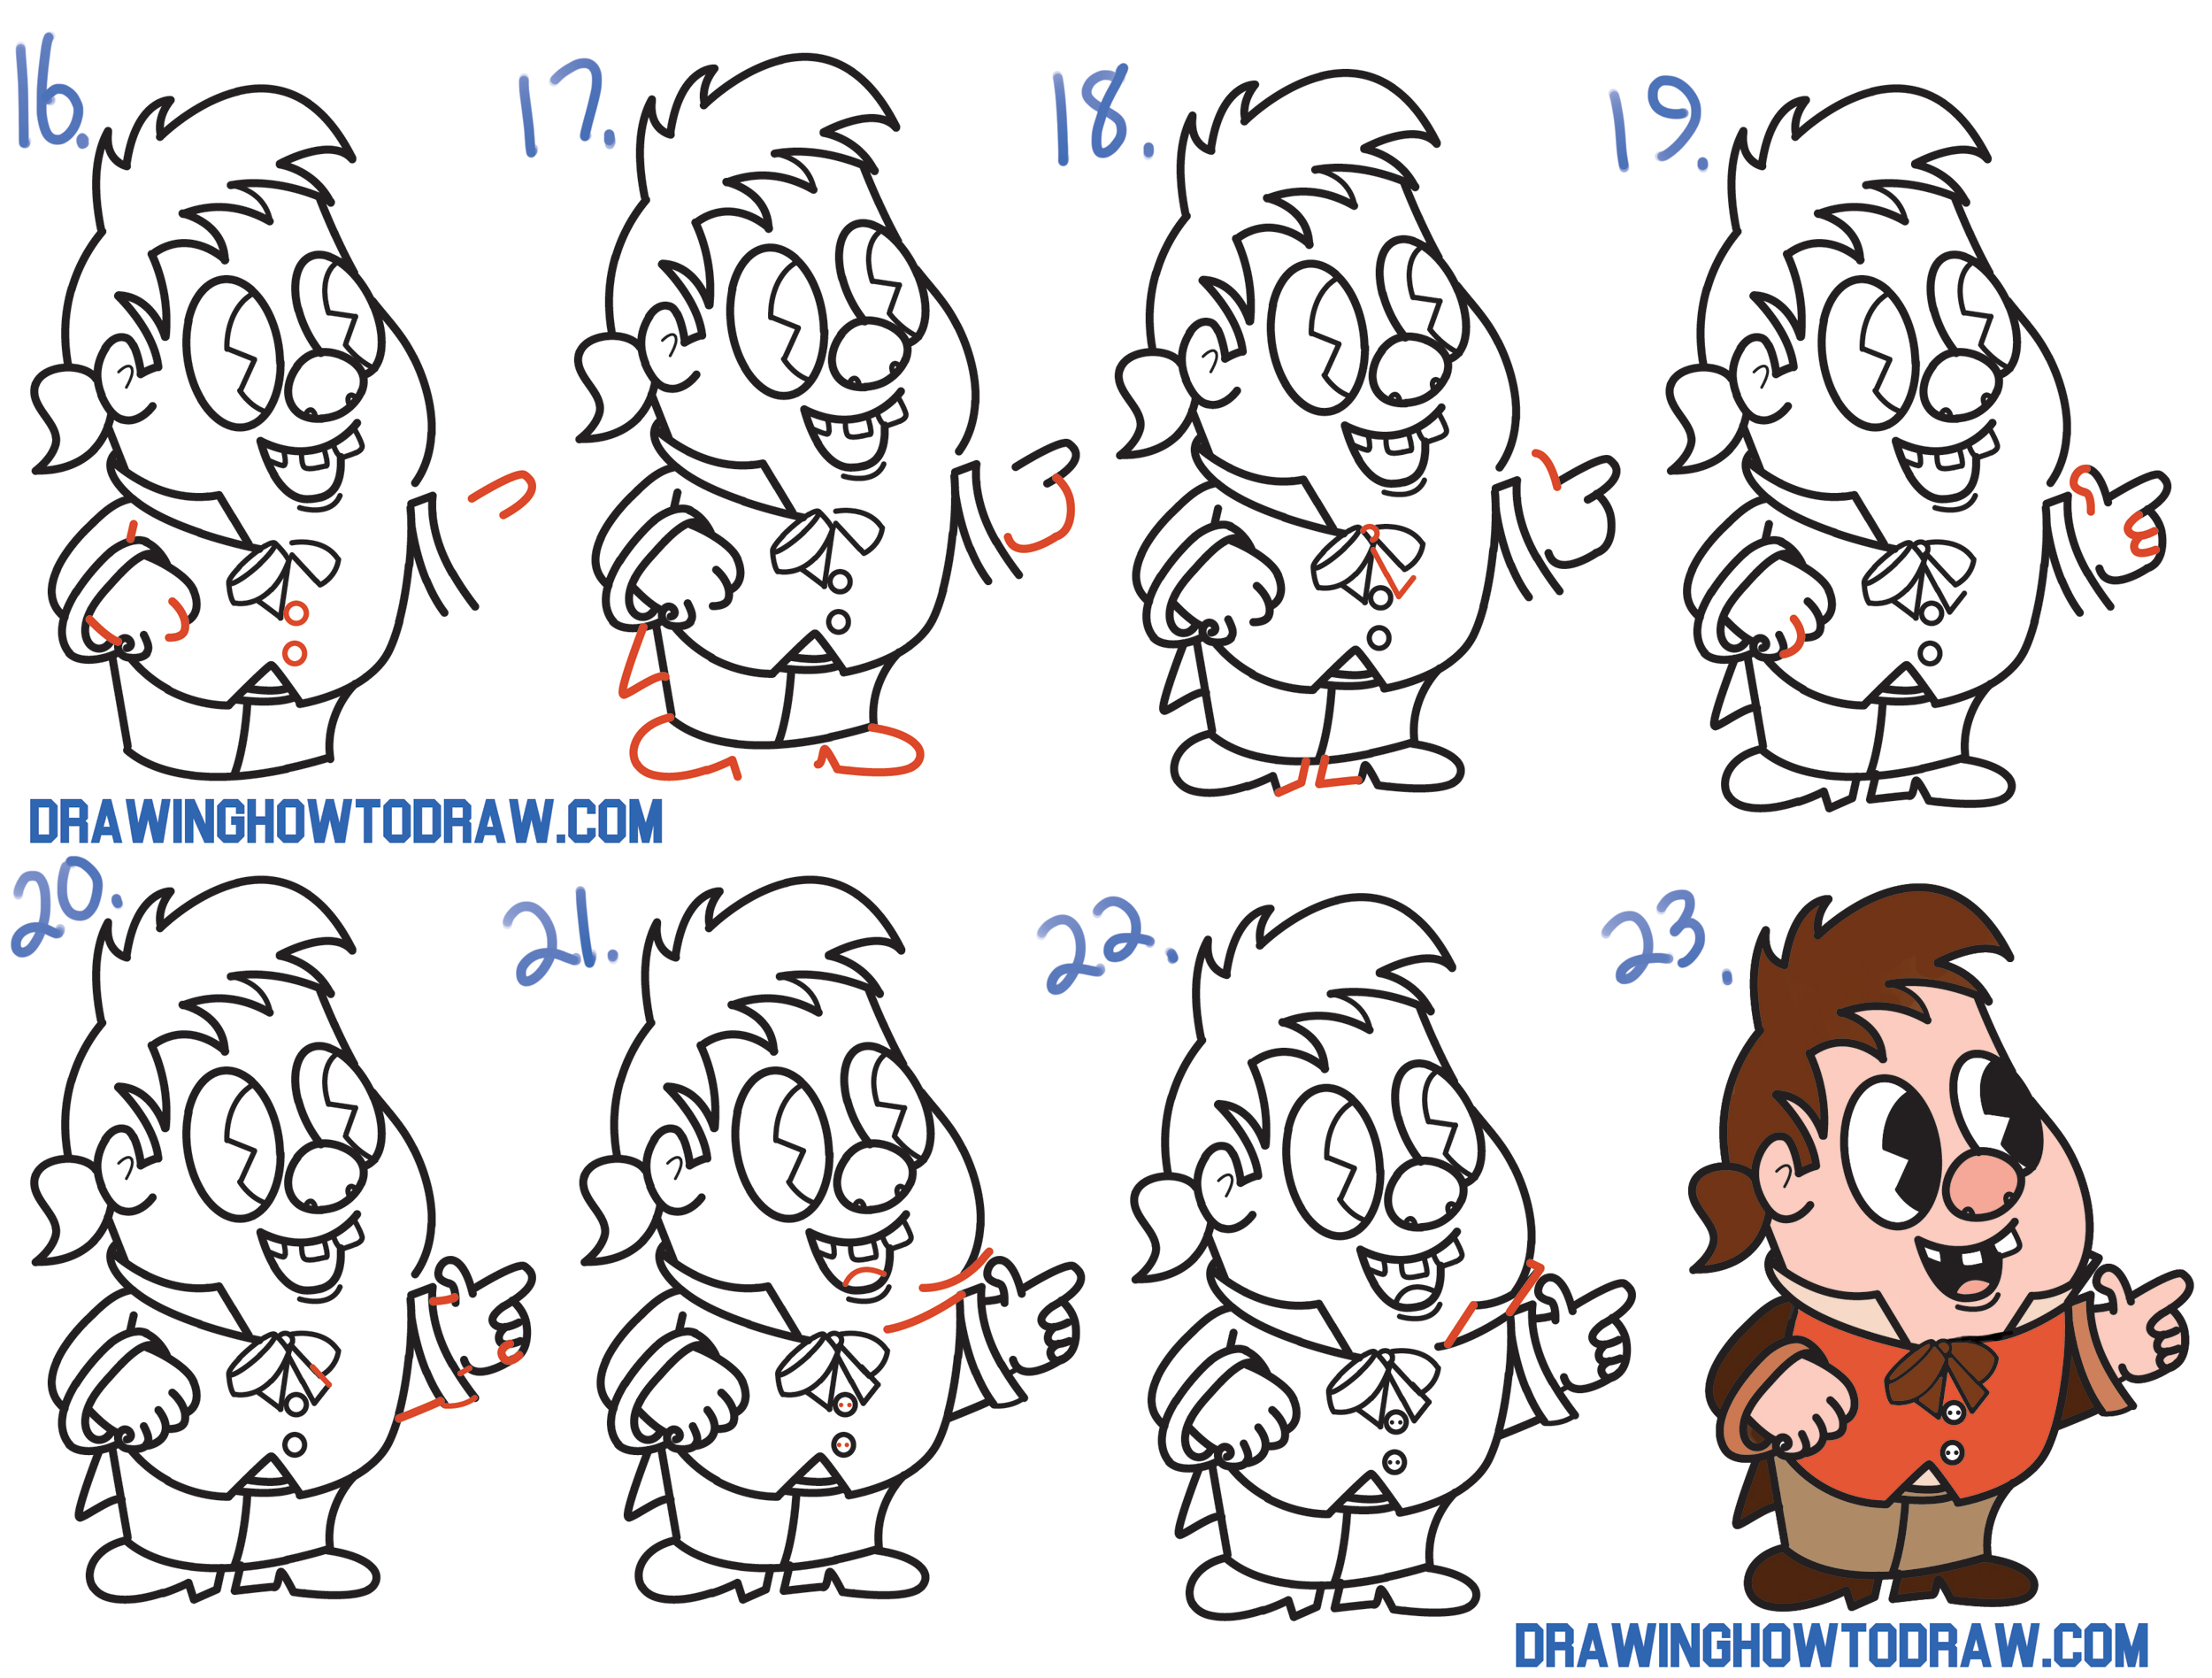 How to Draw Cute Kawaii / Chibi LeFou from Beauty and the Beast Easy Step by Step Drawing Tutorial for Kids